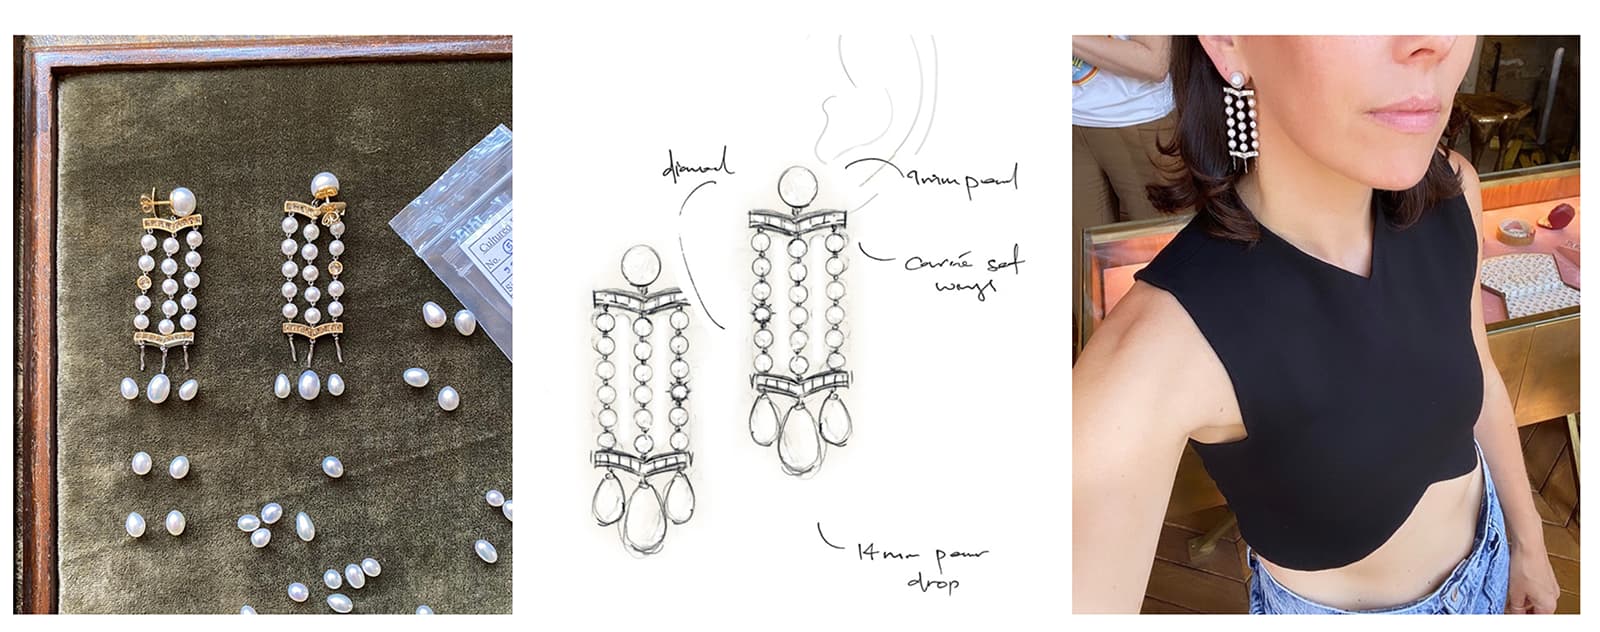 The new Jessica McCormack x Emilia Wickstead collection is the first time that Jessica has used pearls in her designs